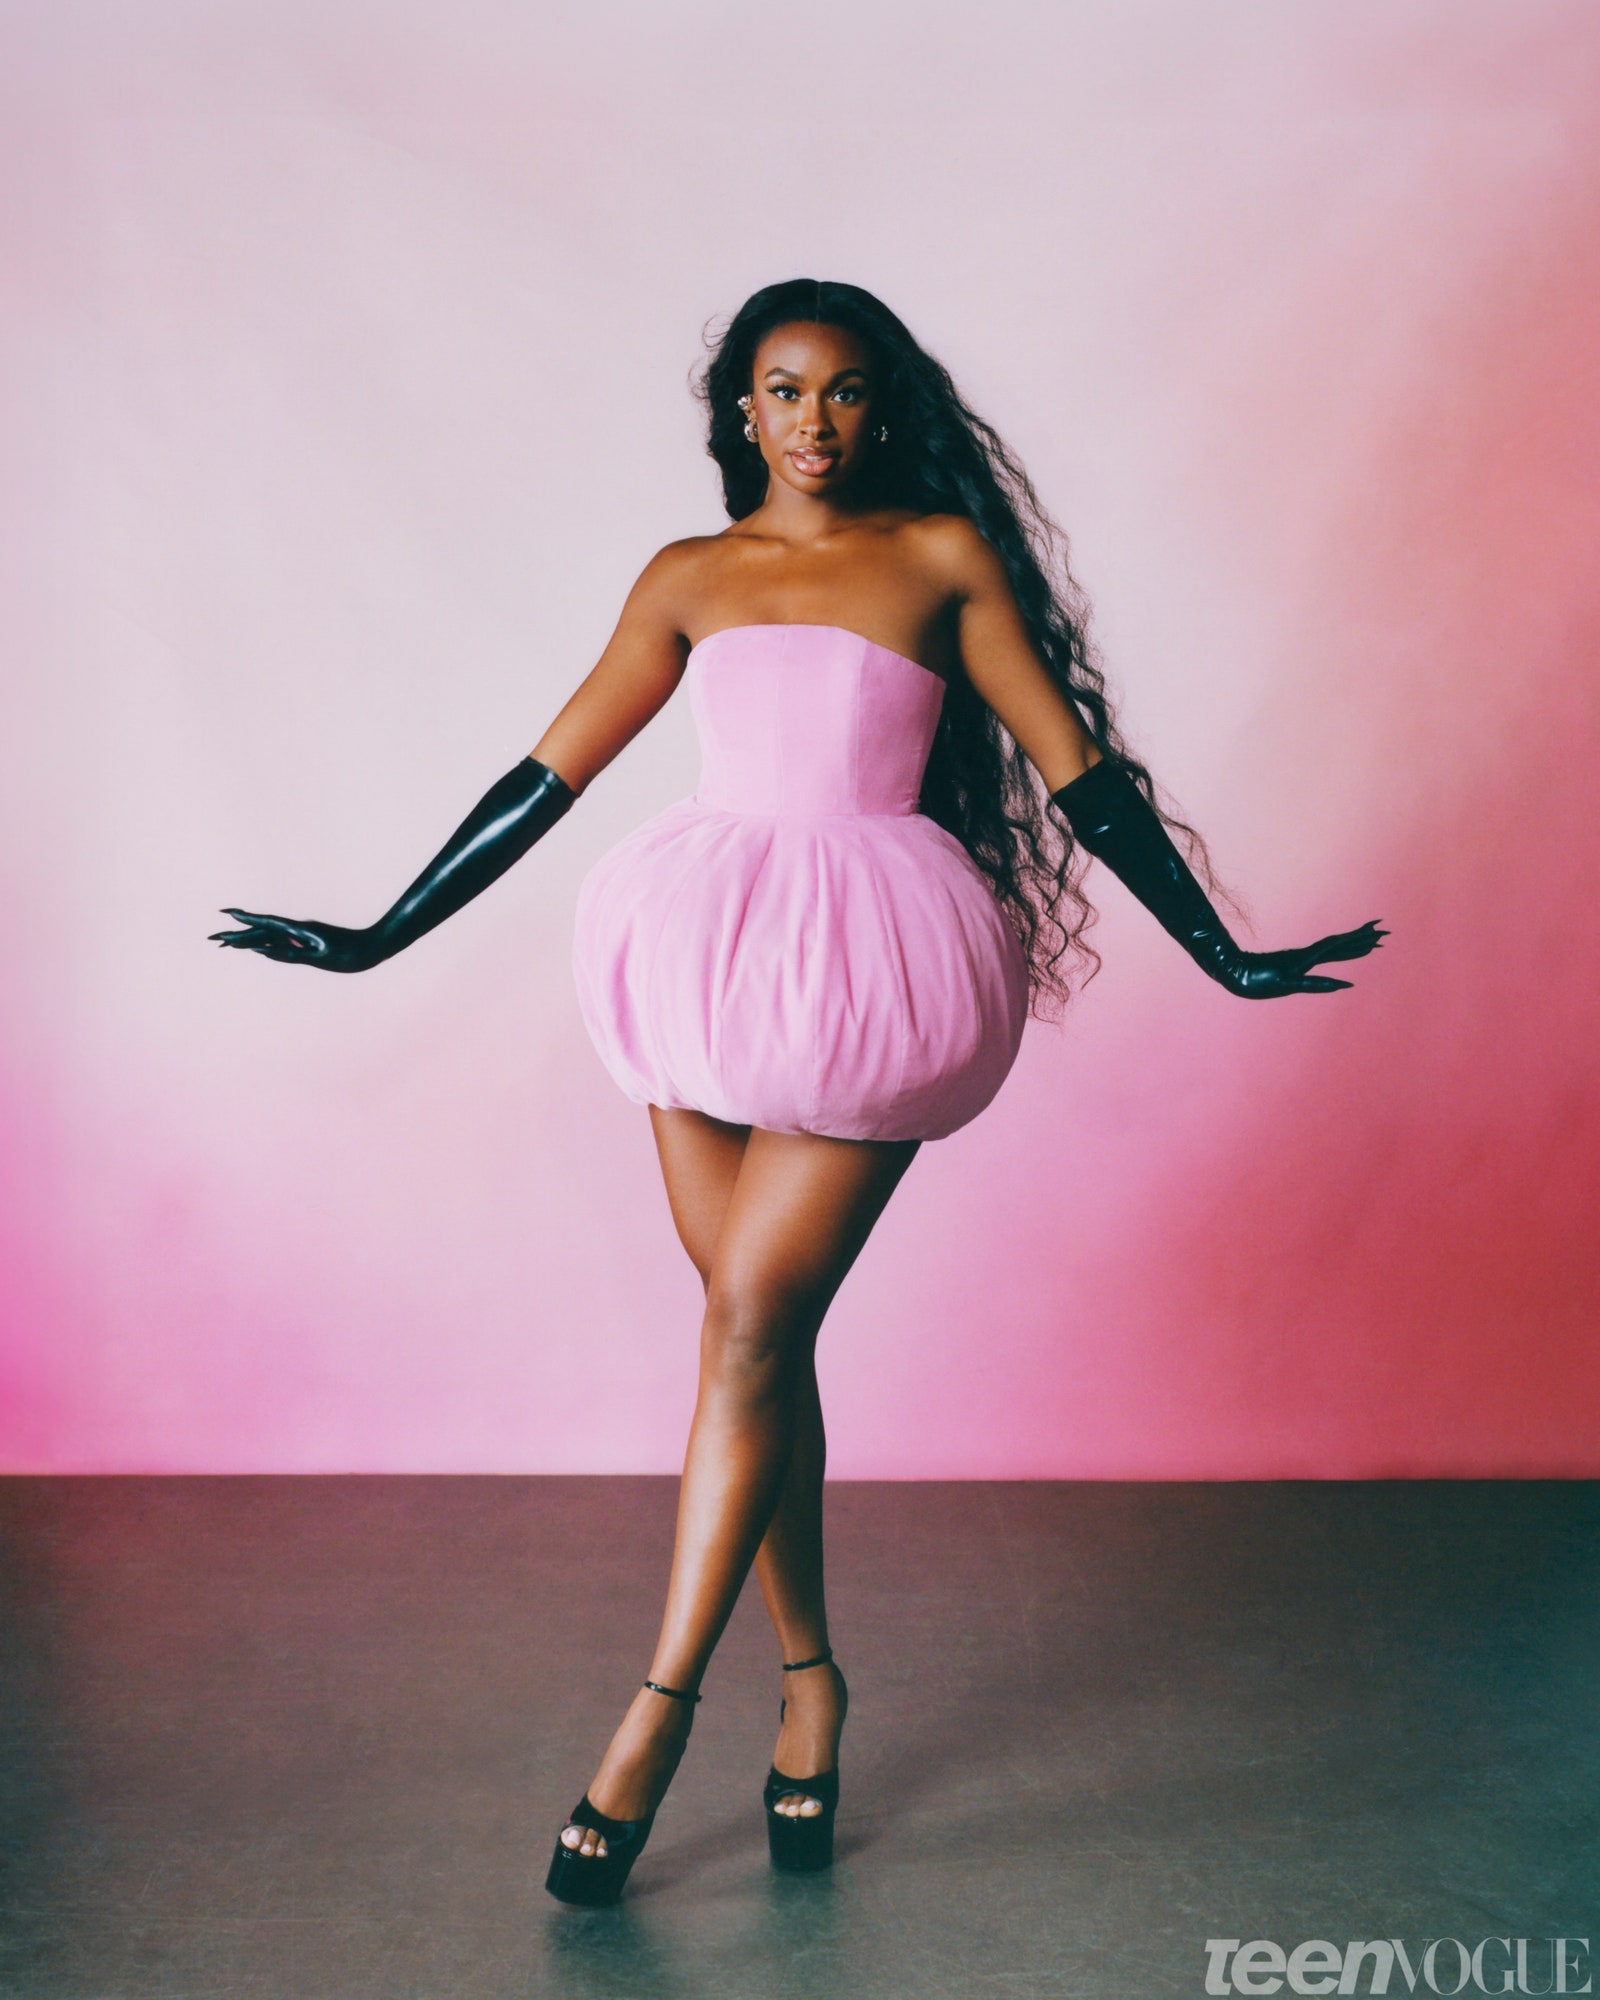 Coco Jones standing against a pink background wearing a pink dress and black latex gloves